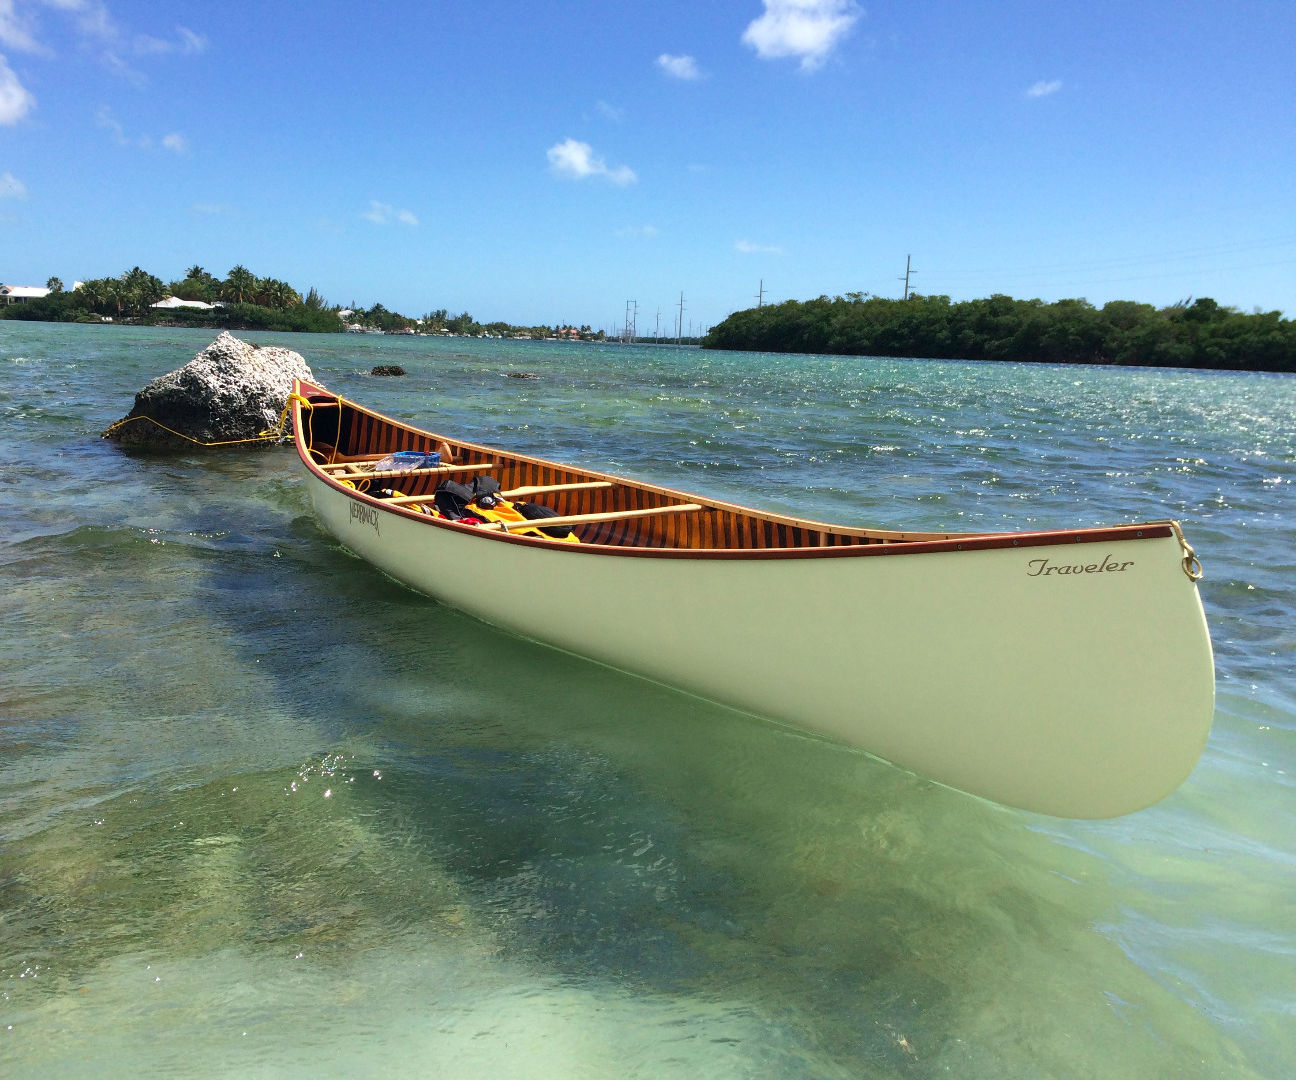 How to clean a canoe after ocean use